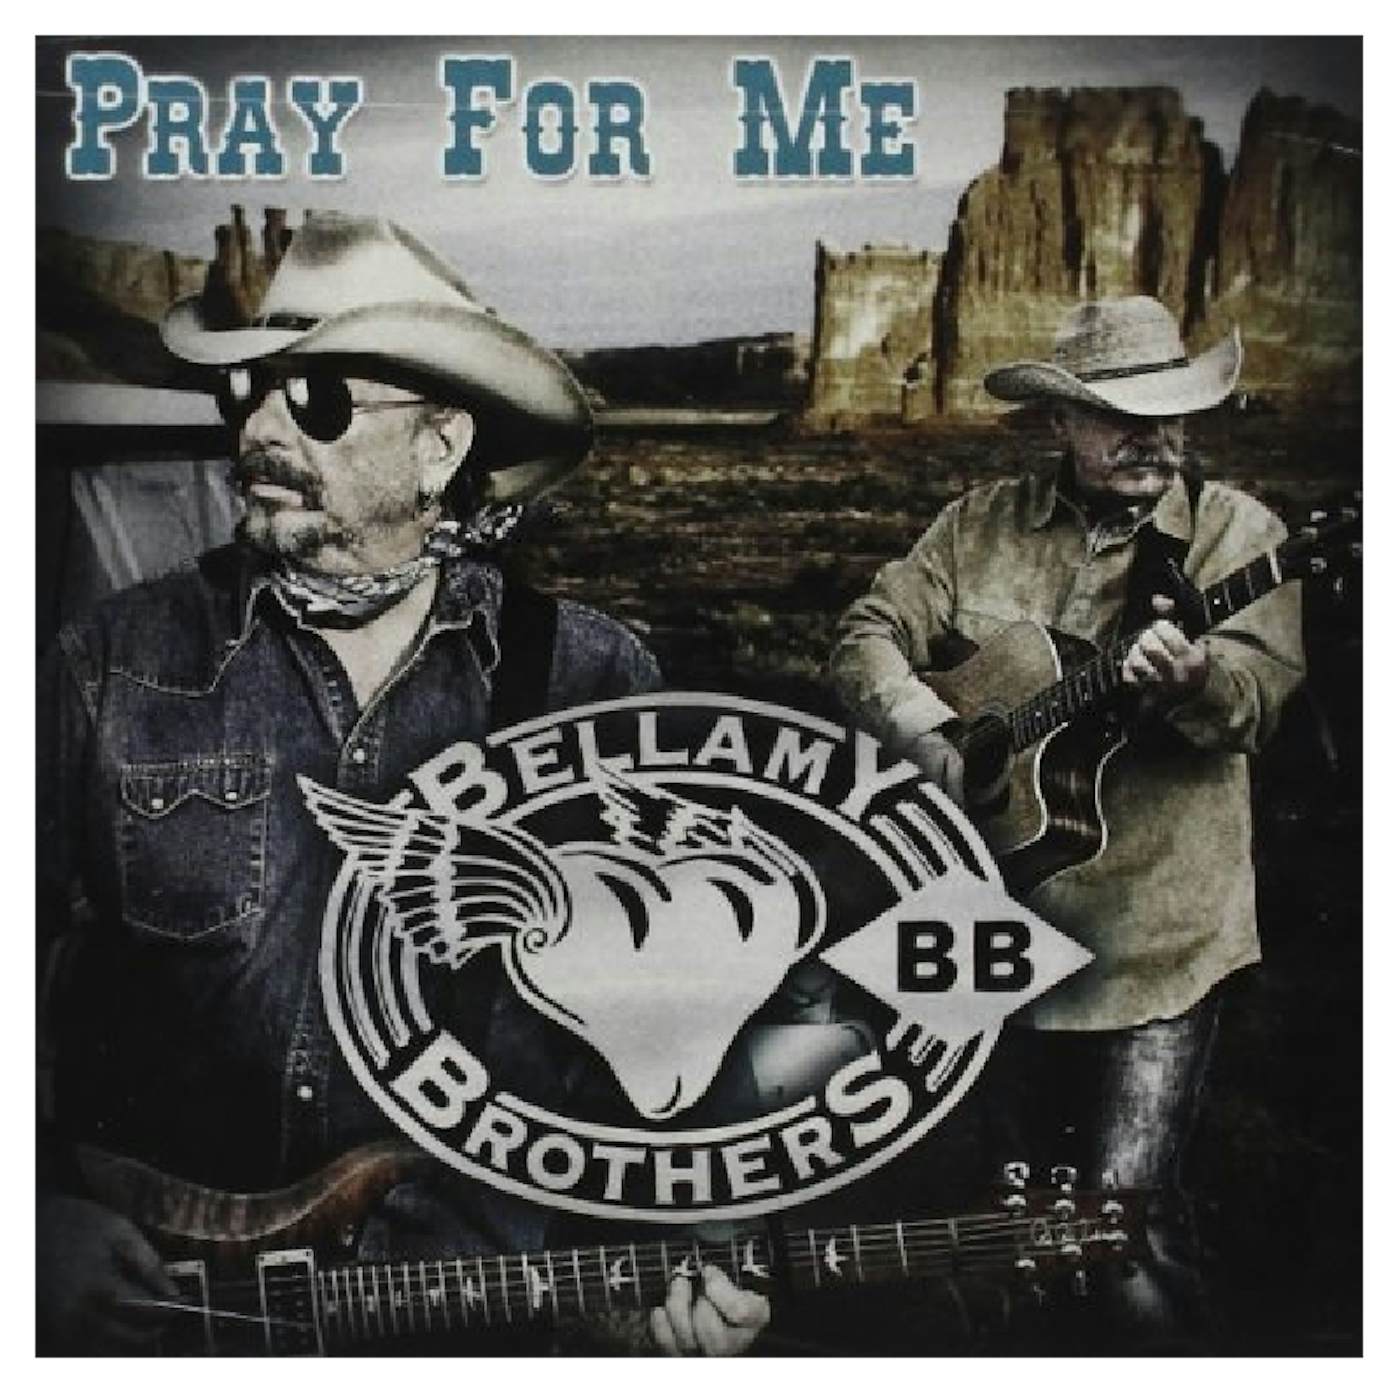 The Bellamy Brothers CD- Pray For Me